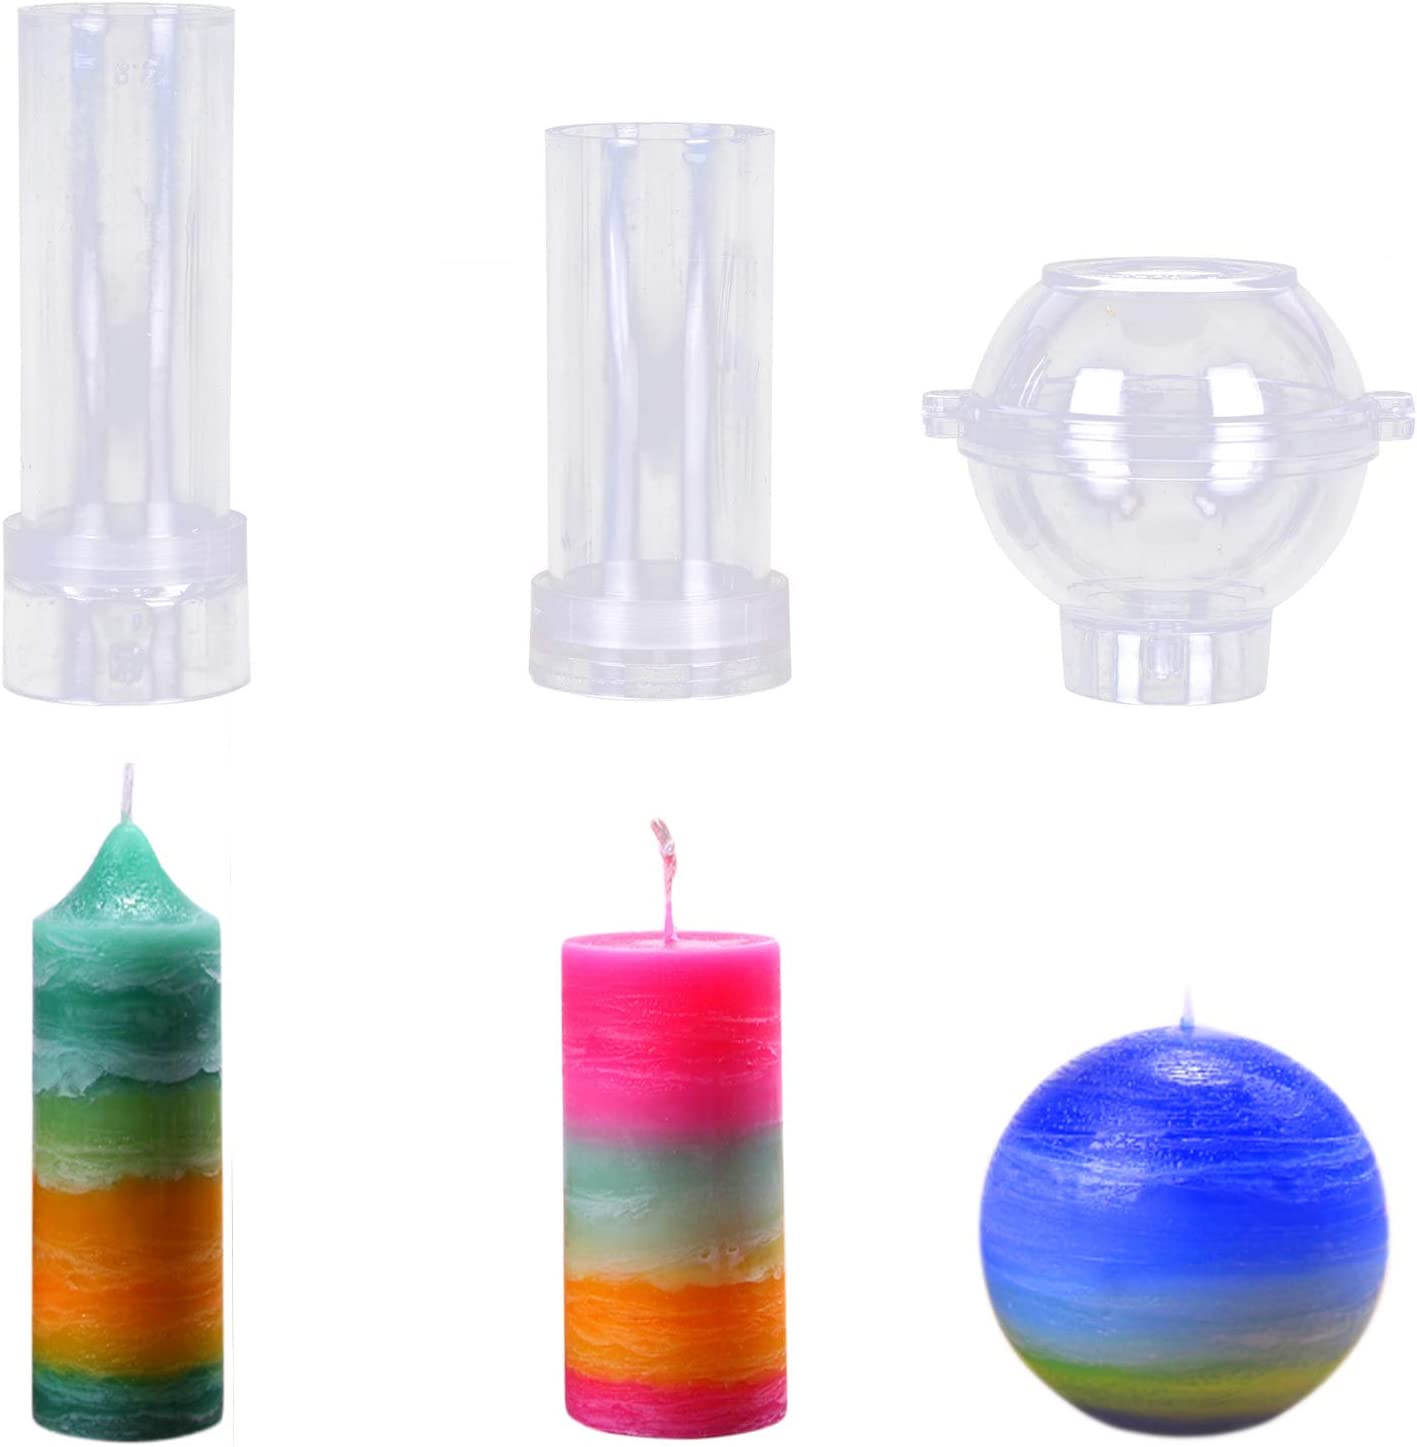 MeiMeiDa Plastic Candle Molds for Candle Making Set of 3 – Including Pillar Mold, Cylinder Mold and Sphere Mold – Make Your Own Candles – Great for DIY Homemade Candles